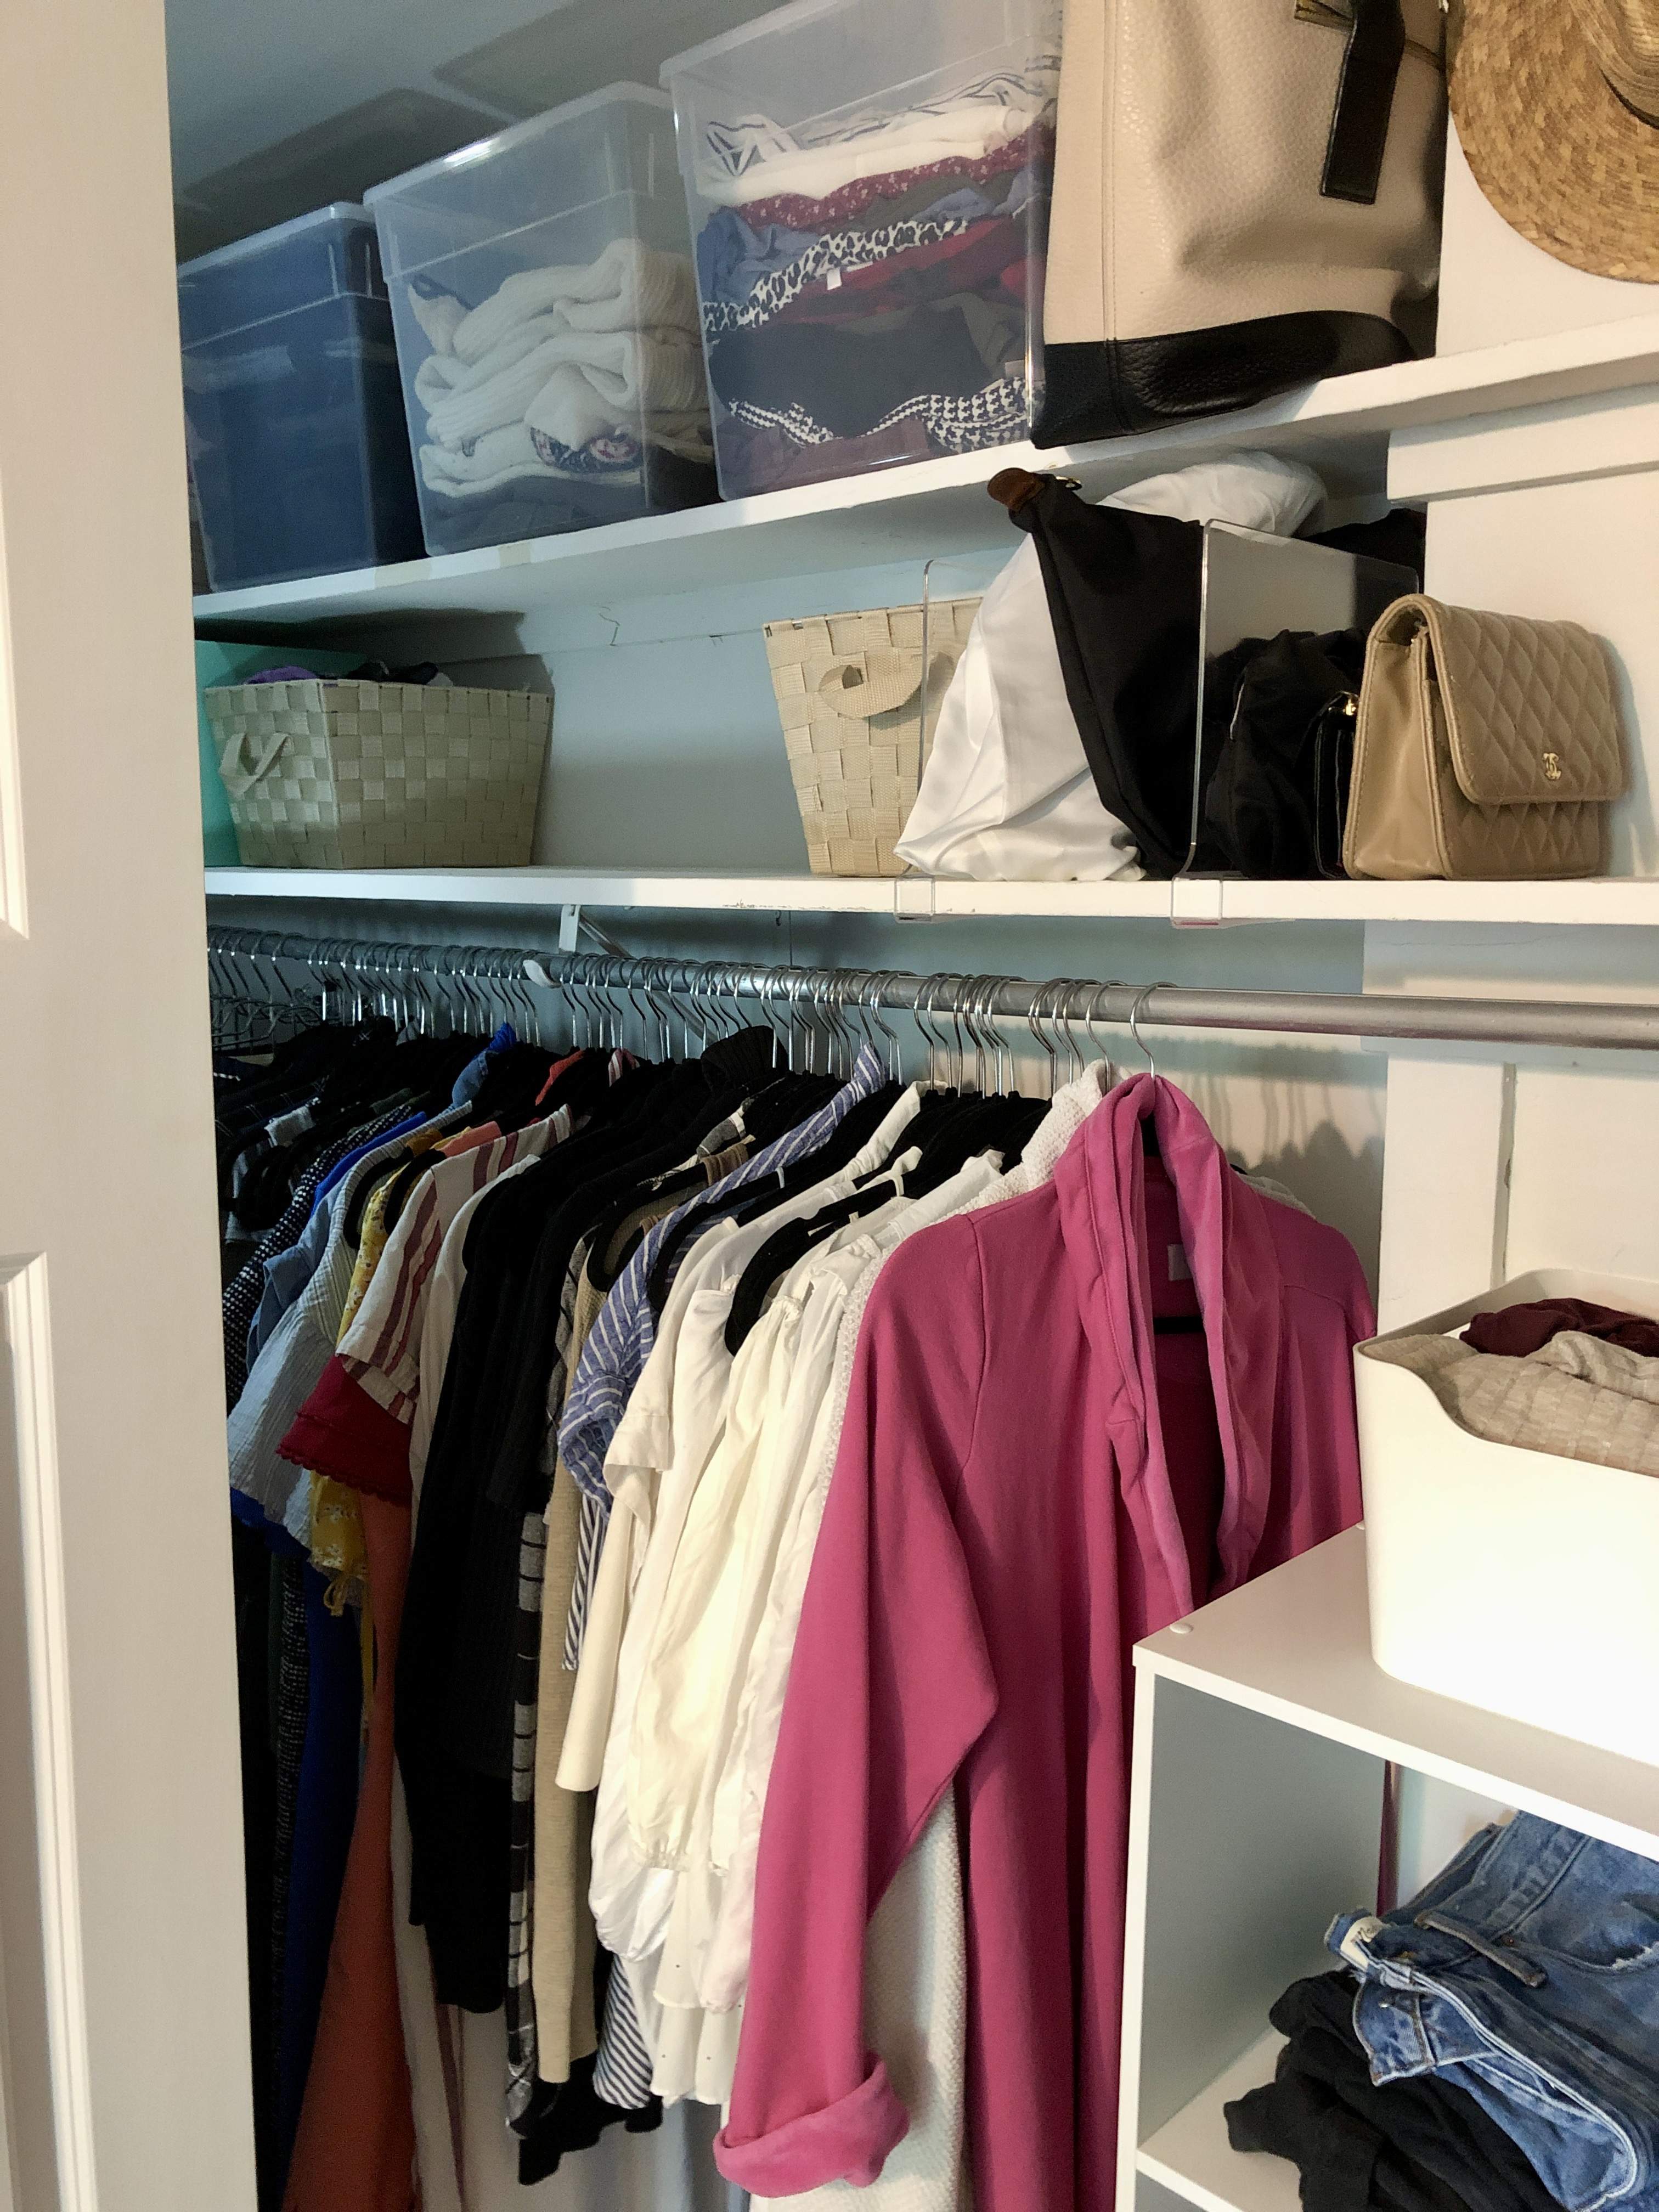 Clear containers hold off-season clothing on top shelves